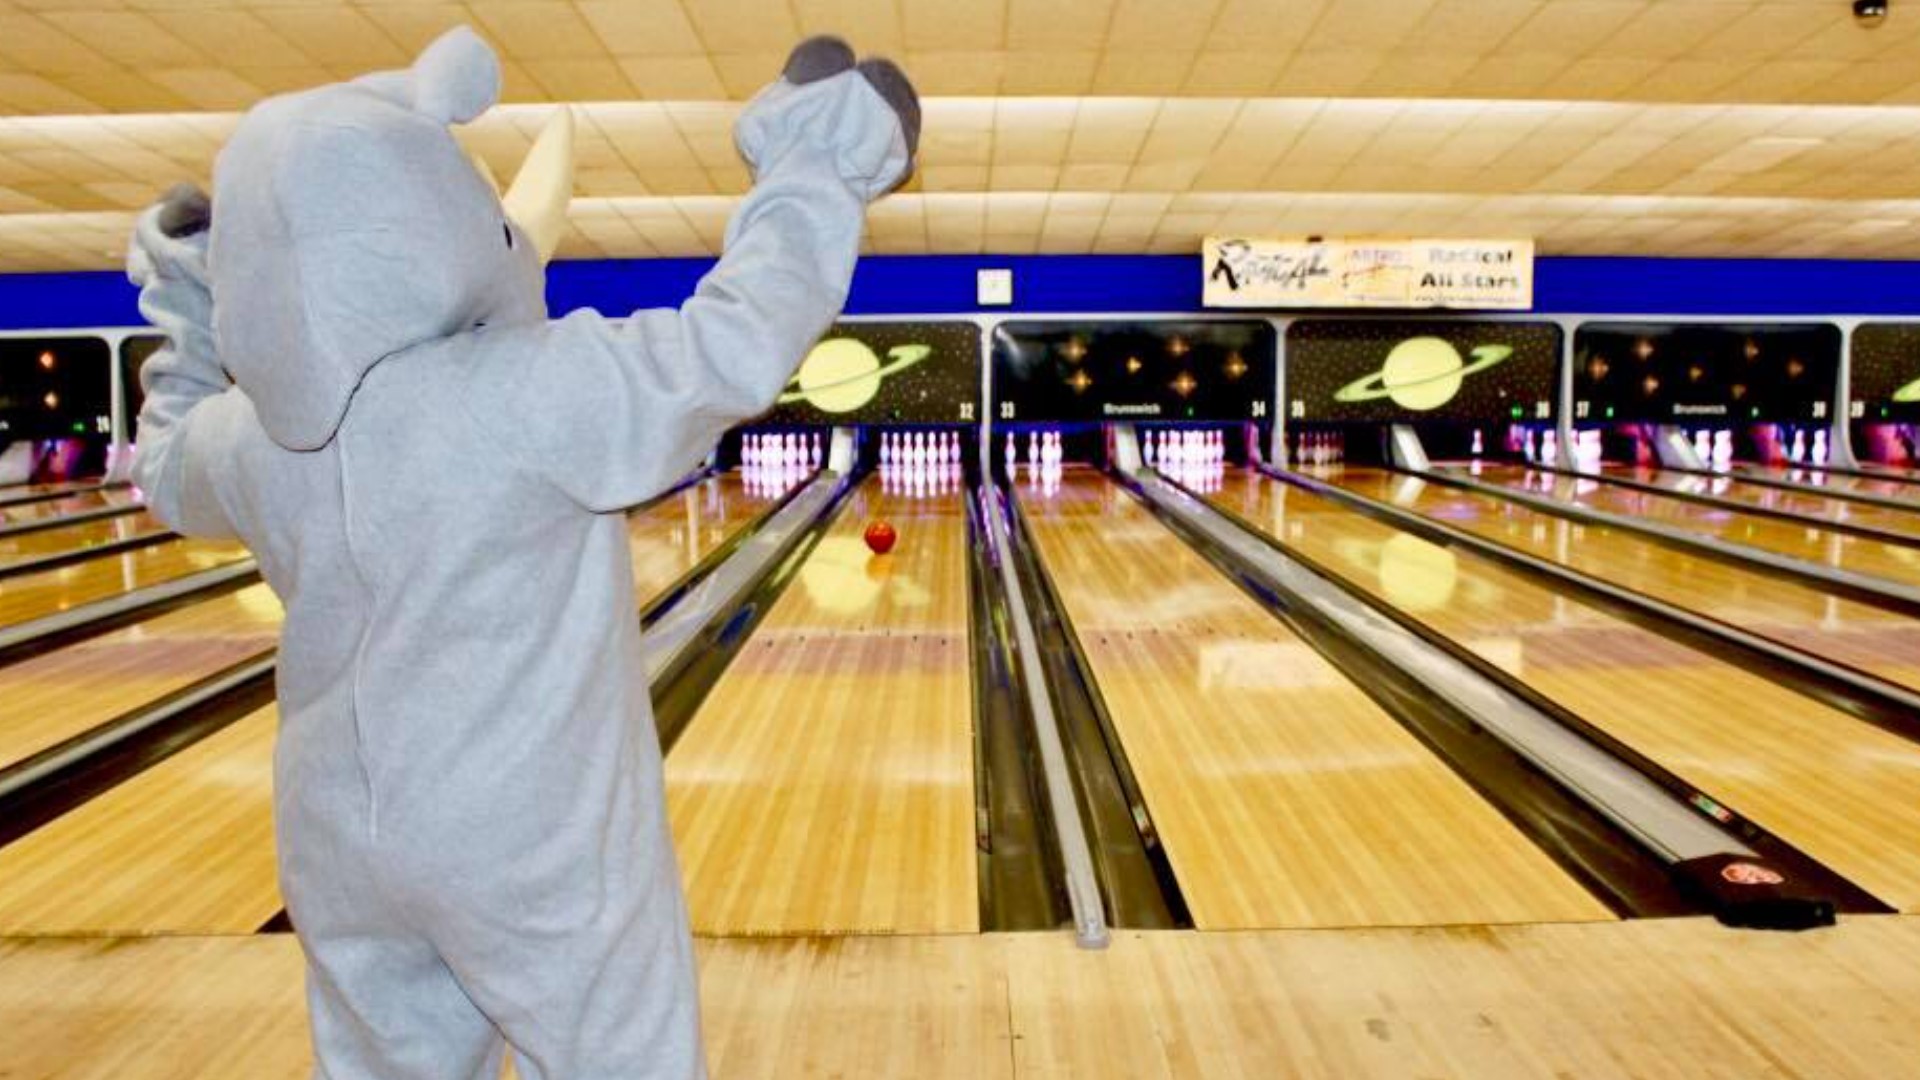 If you love animals and bowling, the San Antonio chapter of the American Association of Zoo Keepers has an event that's right up your alley!